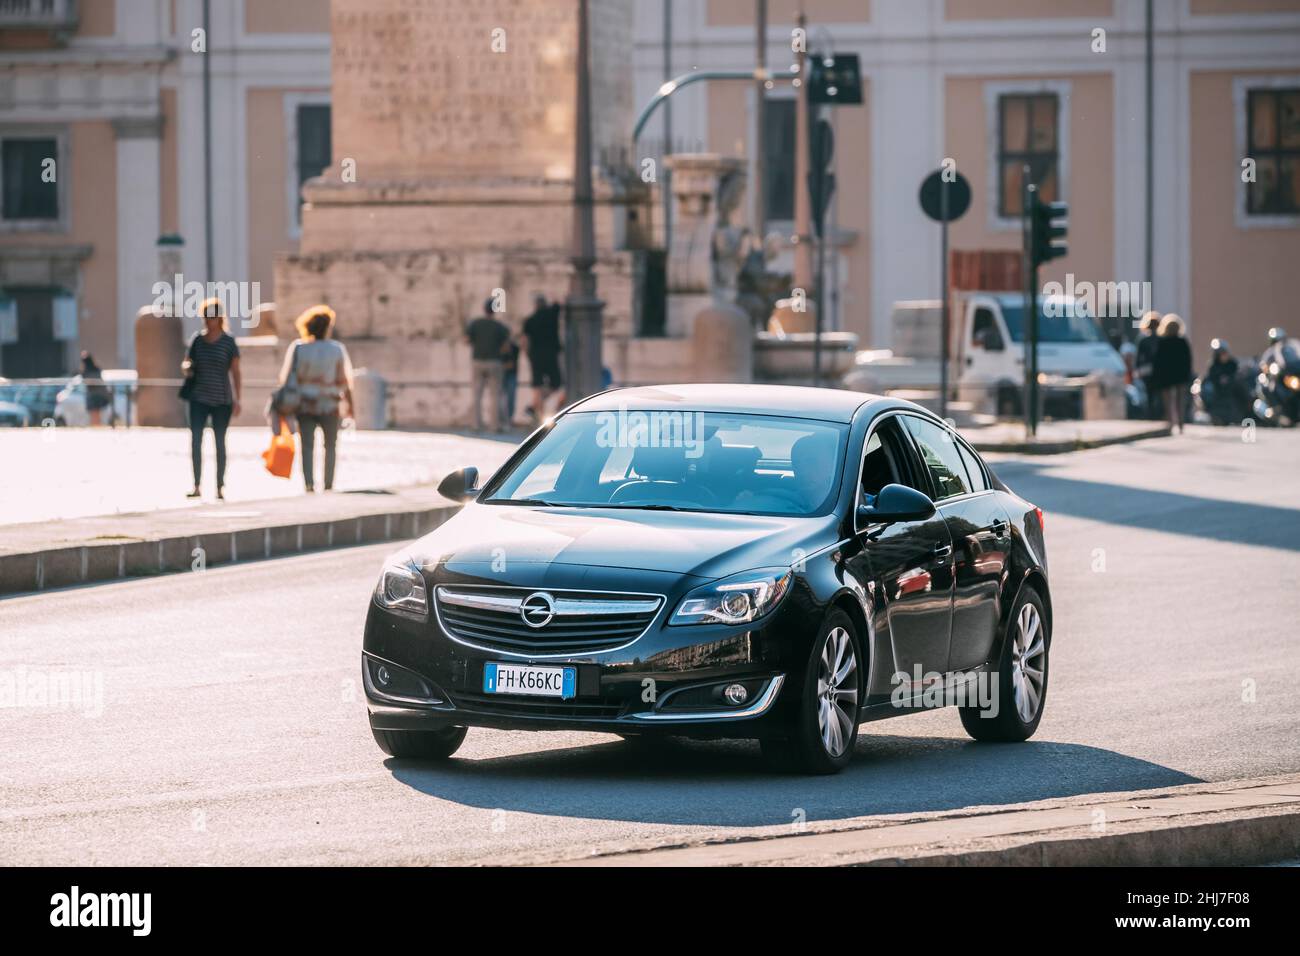 Black Color Opel Insignia With Face-lift In First Generation Moving At Street. Stock Photo